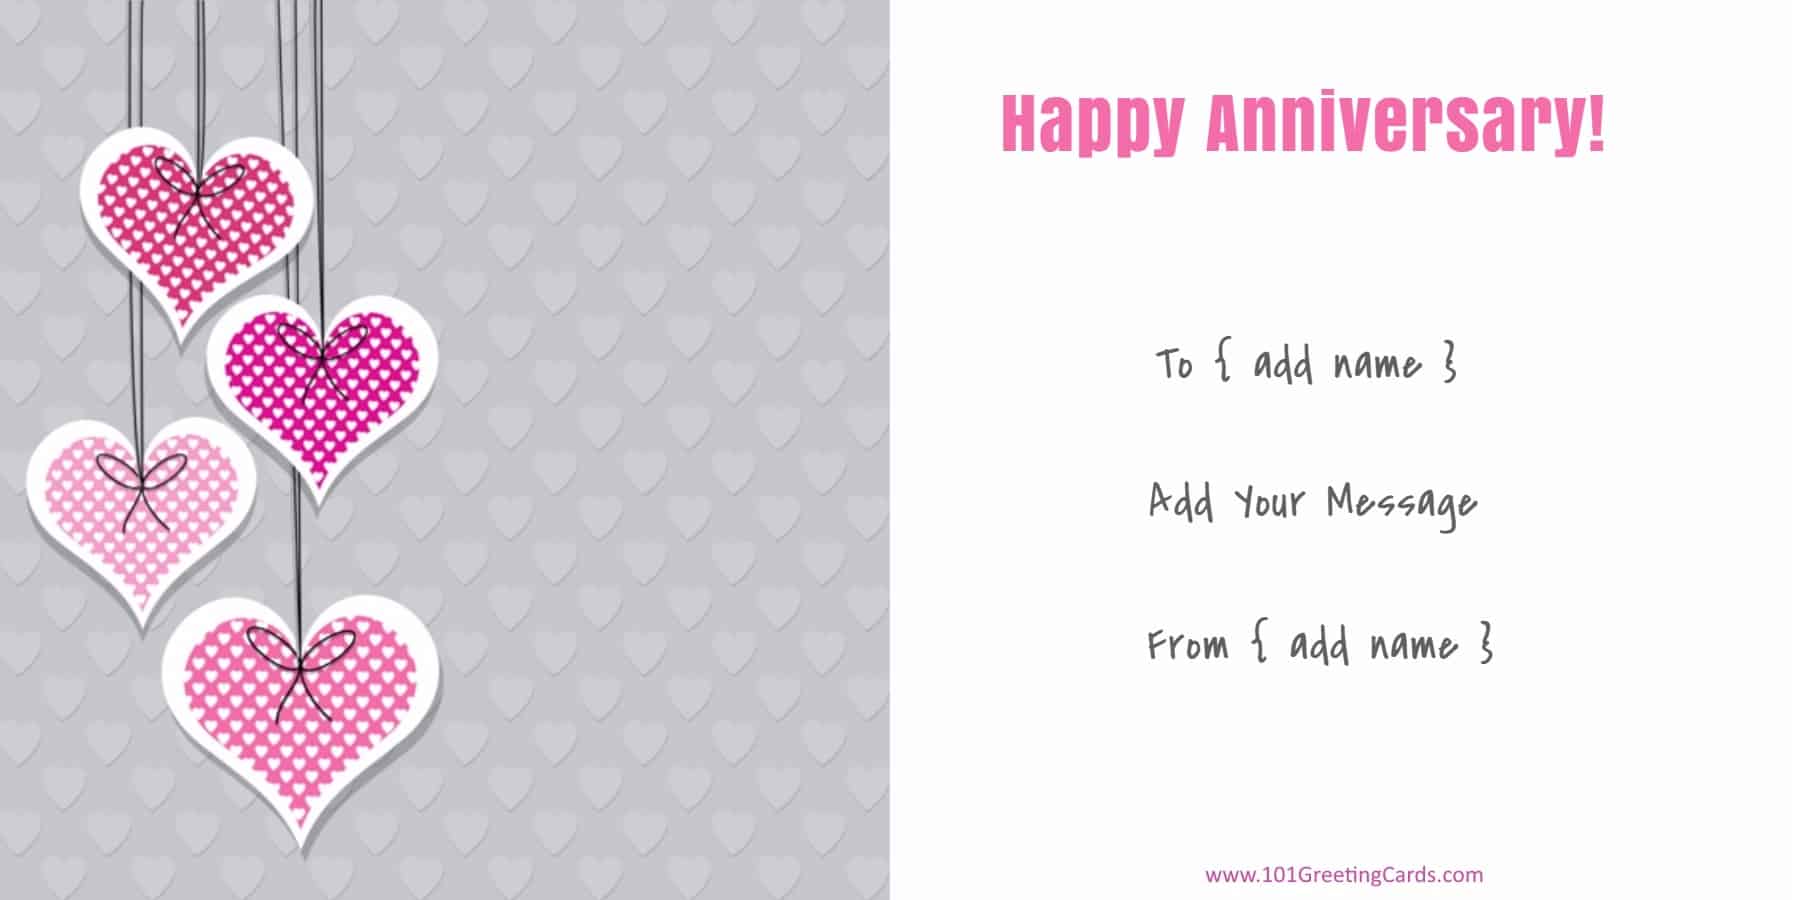 Anniversary Cards 101 Greeting Cards